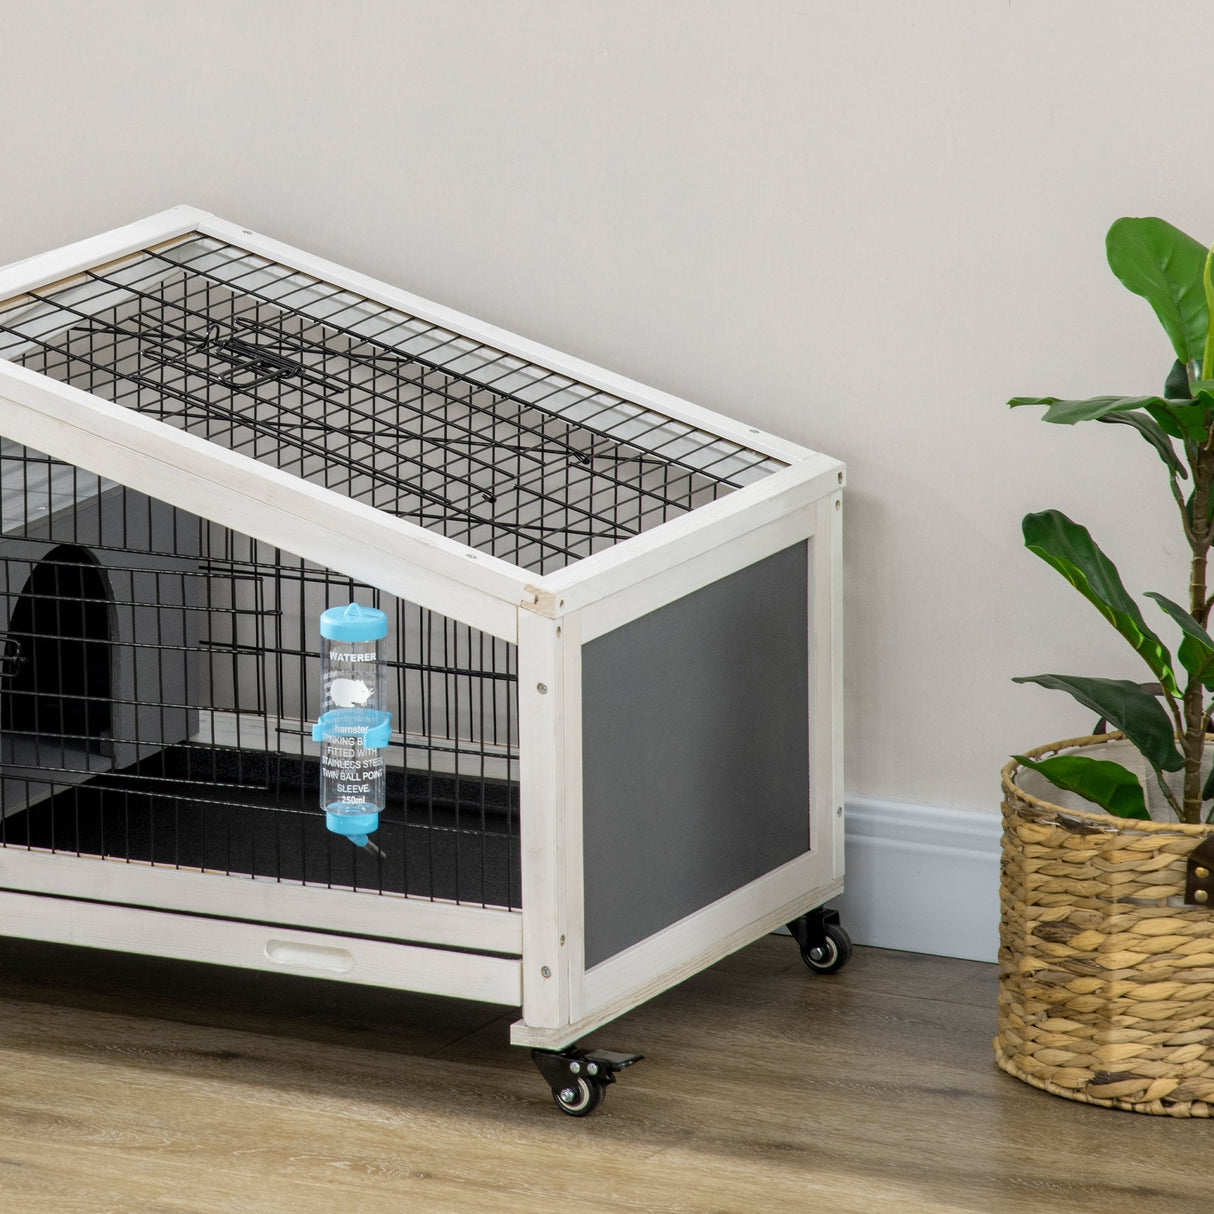 Rabbit Hutch with Water Bottle, Guinea Pig Cage with Wheels, Bunny Run with Plastic Slide-out Tray, Small Animal House for Indoor, Dark Grey, PawHut,